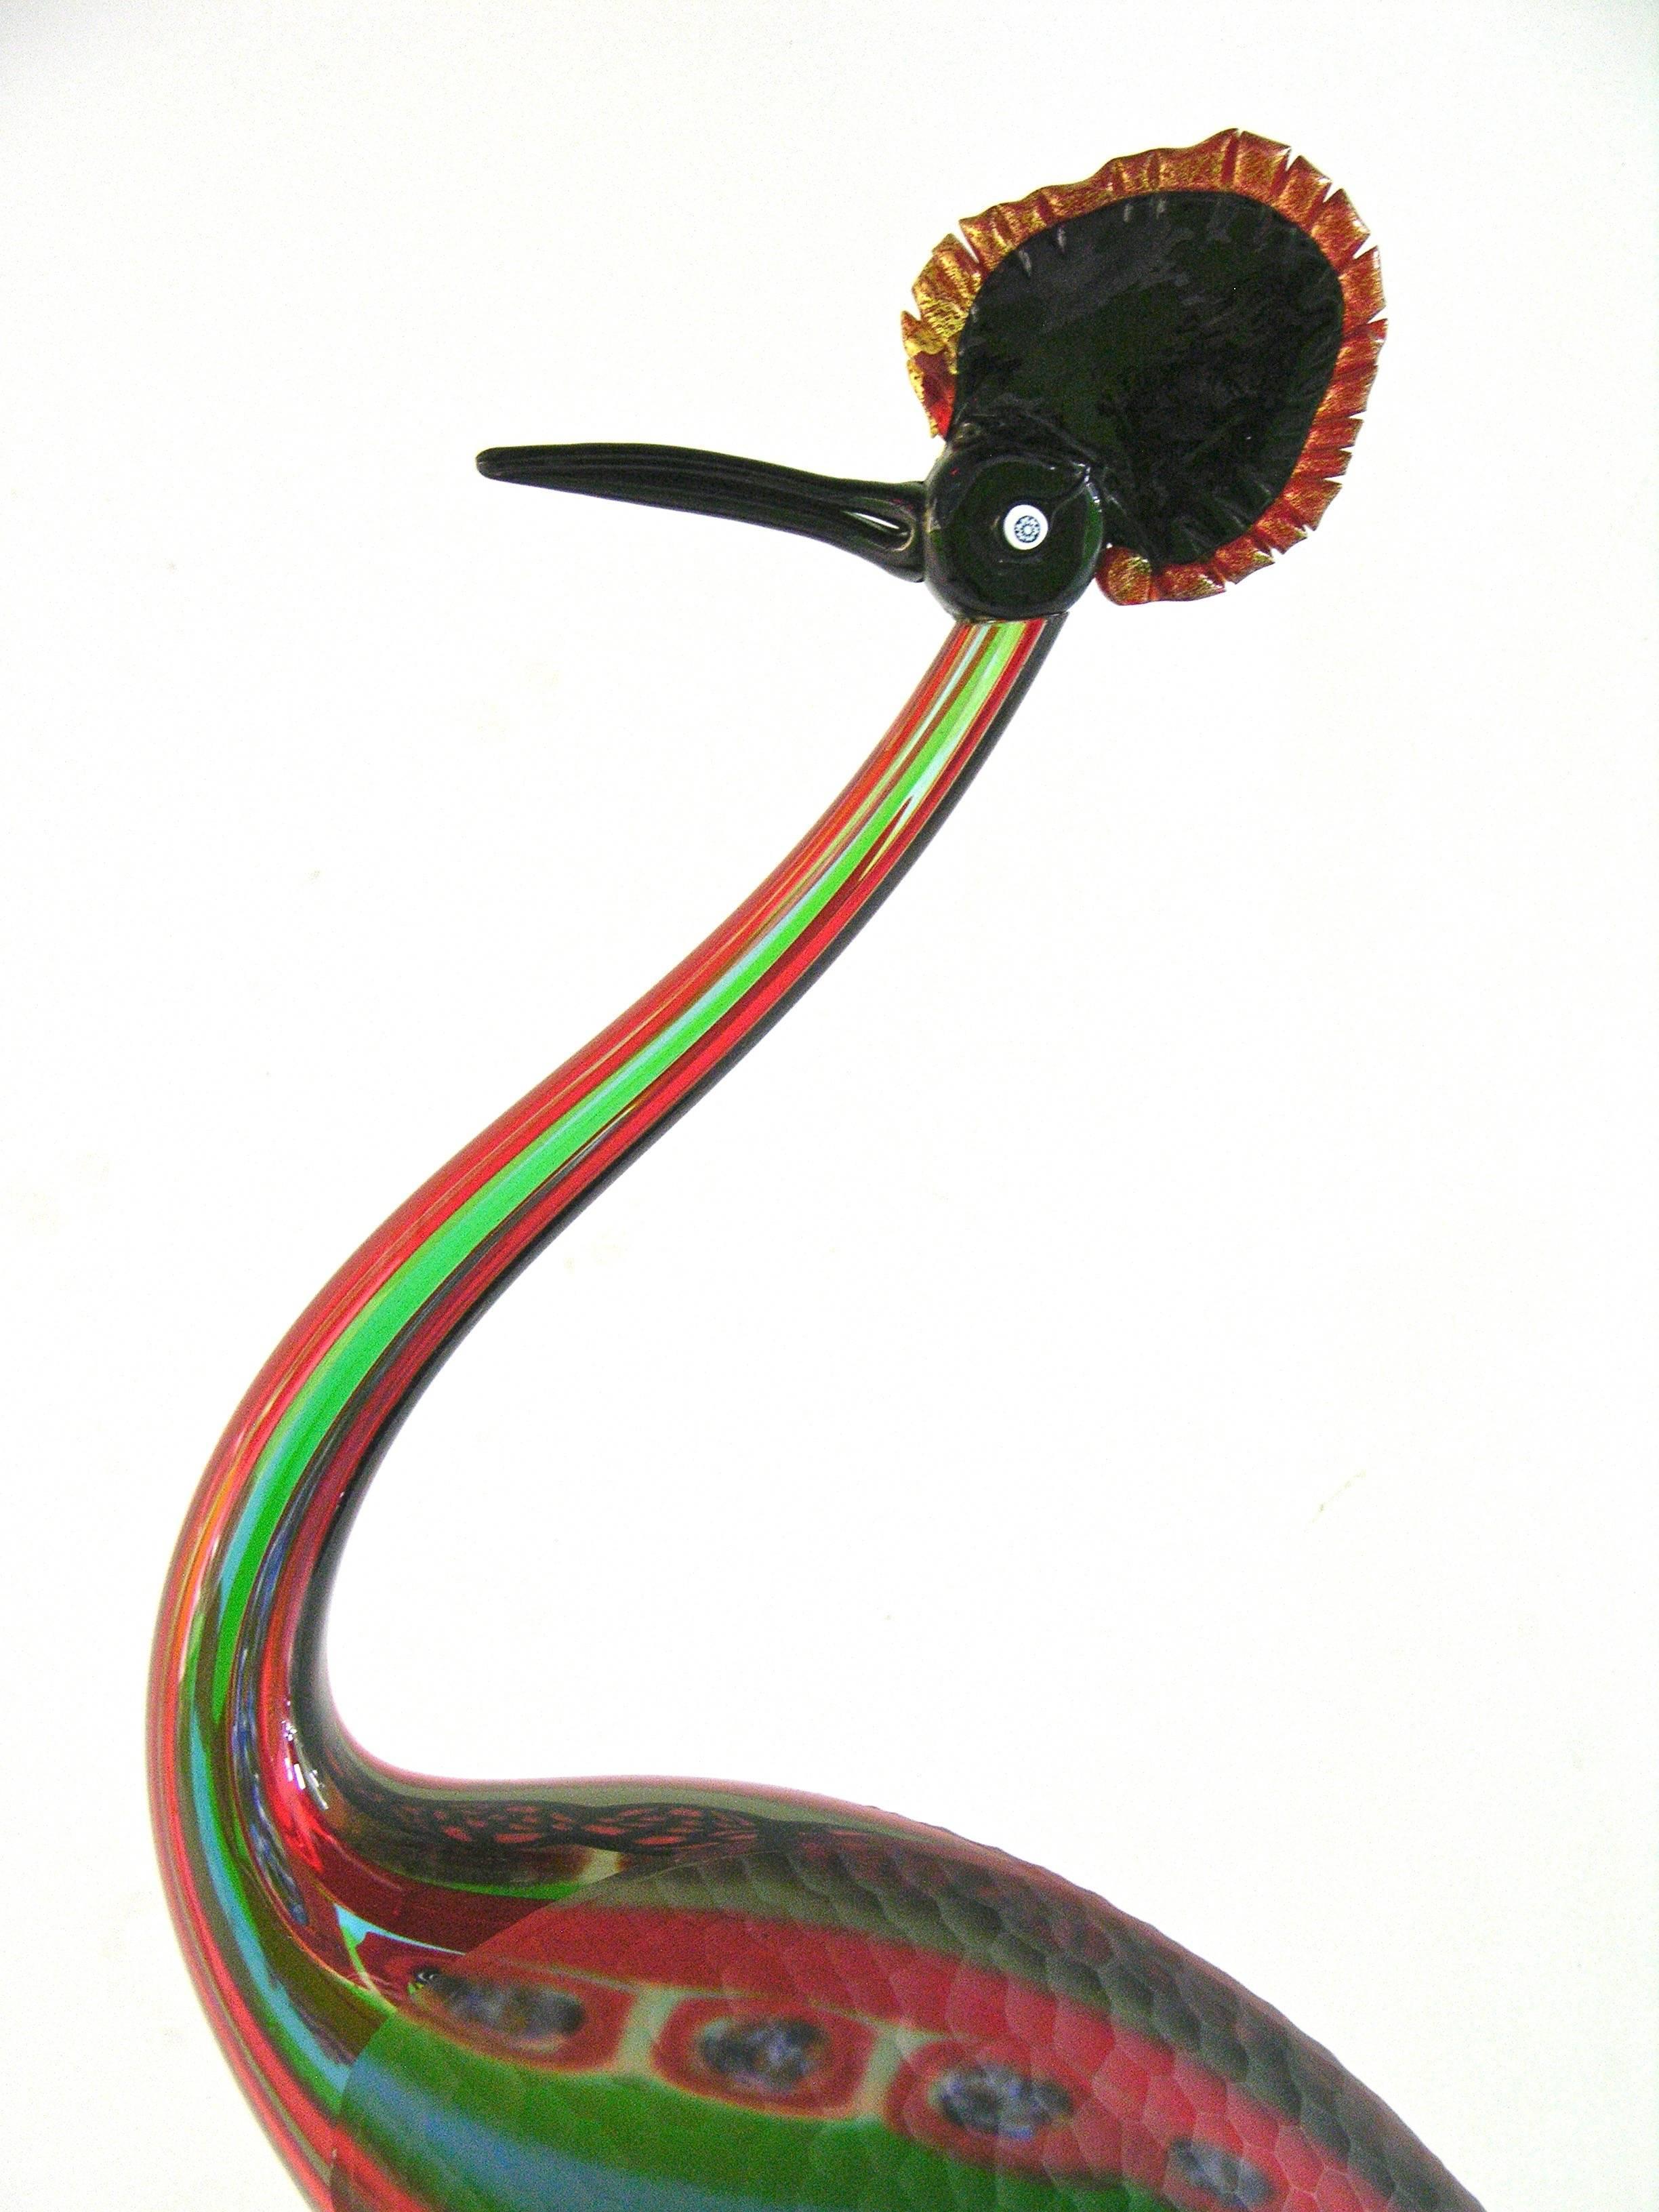 This very expressive crested crane art glass sculpture, from the 1970s, is a true jewel-like work of art, in sophisticated blown Murano glass, with overlaid stripes decor in red, blue and green, with inserted multi colored murrine and part of the